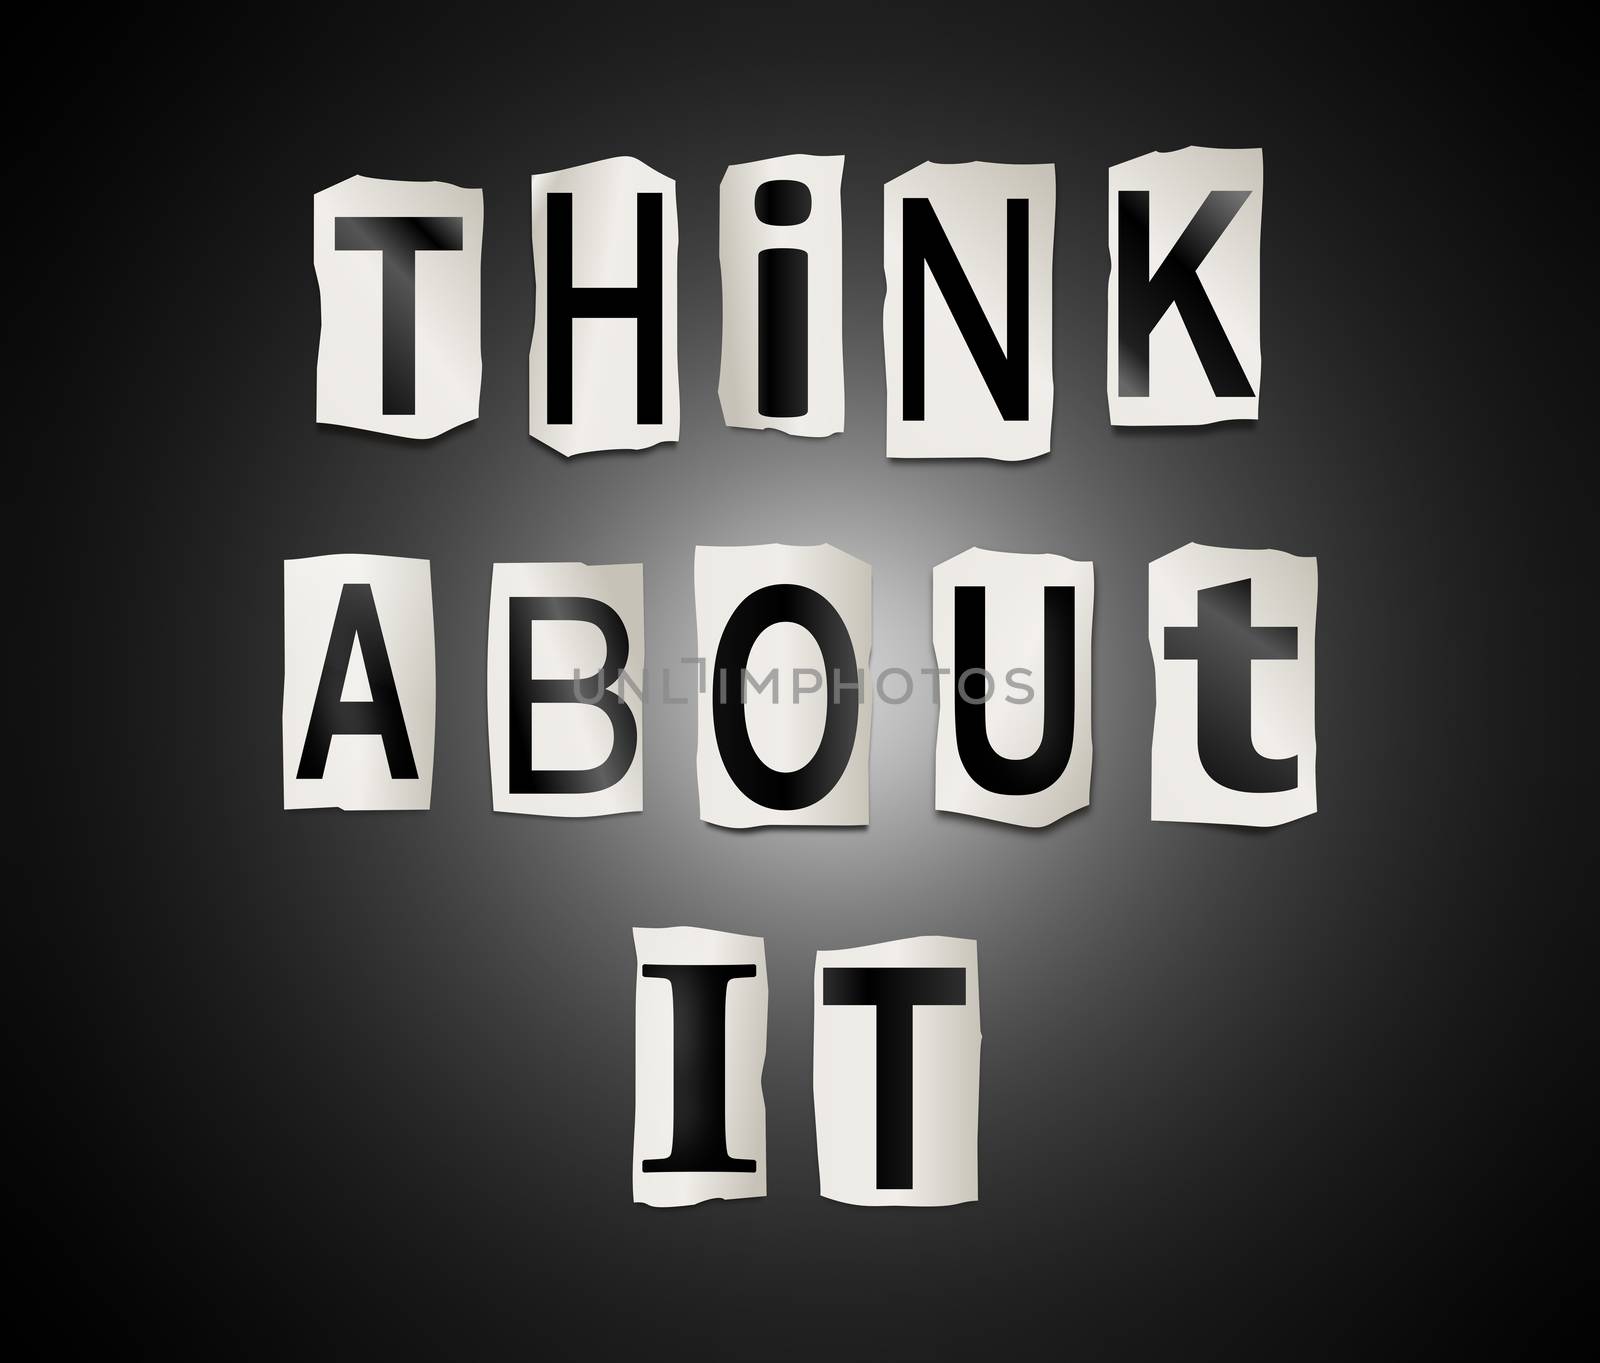 Illustration depicting a set of cut out printed letters arranged to form the words think about it.